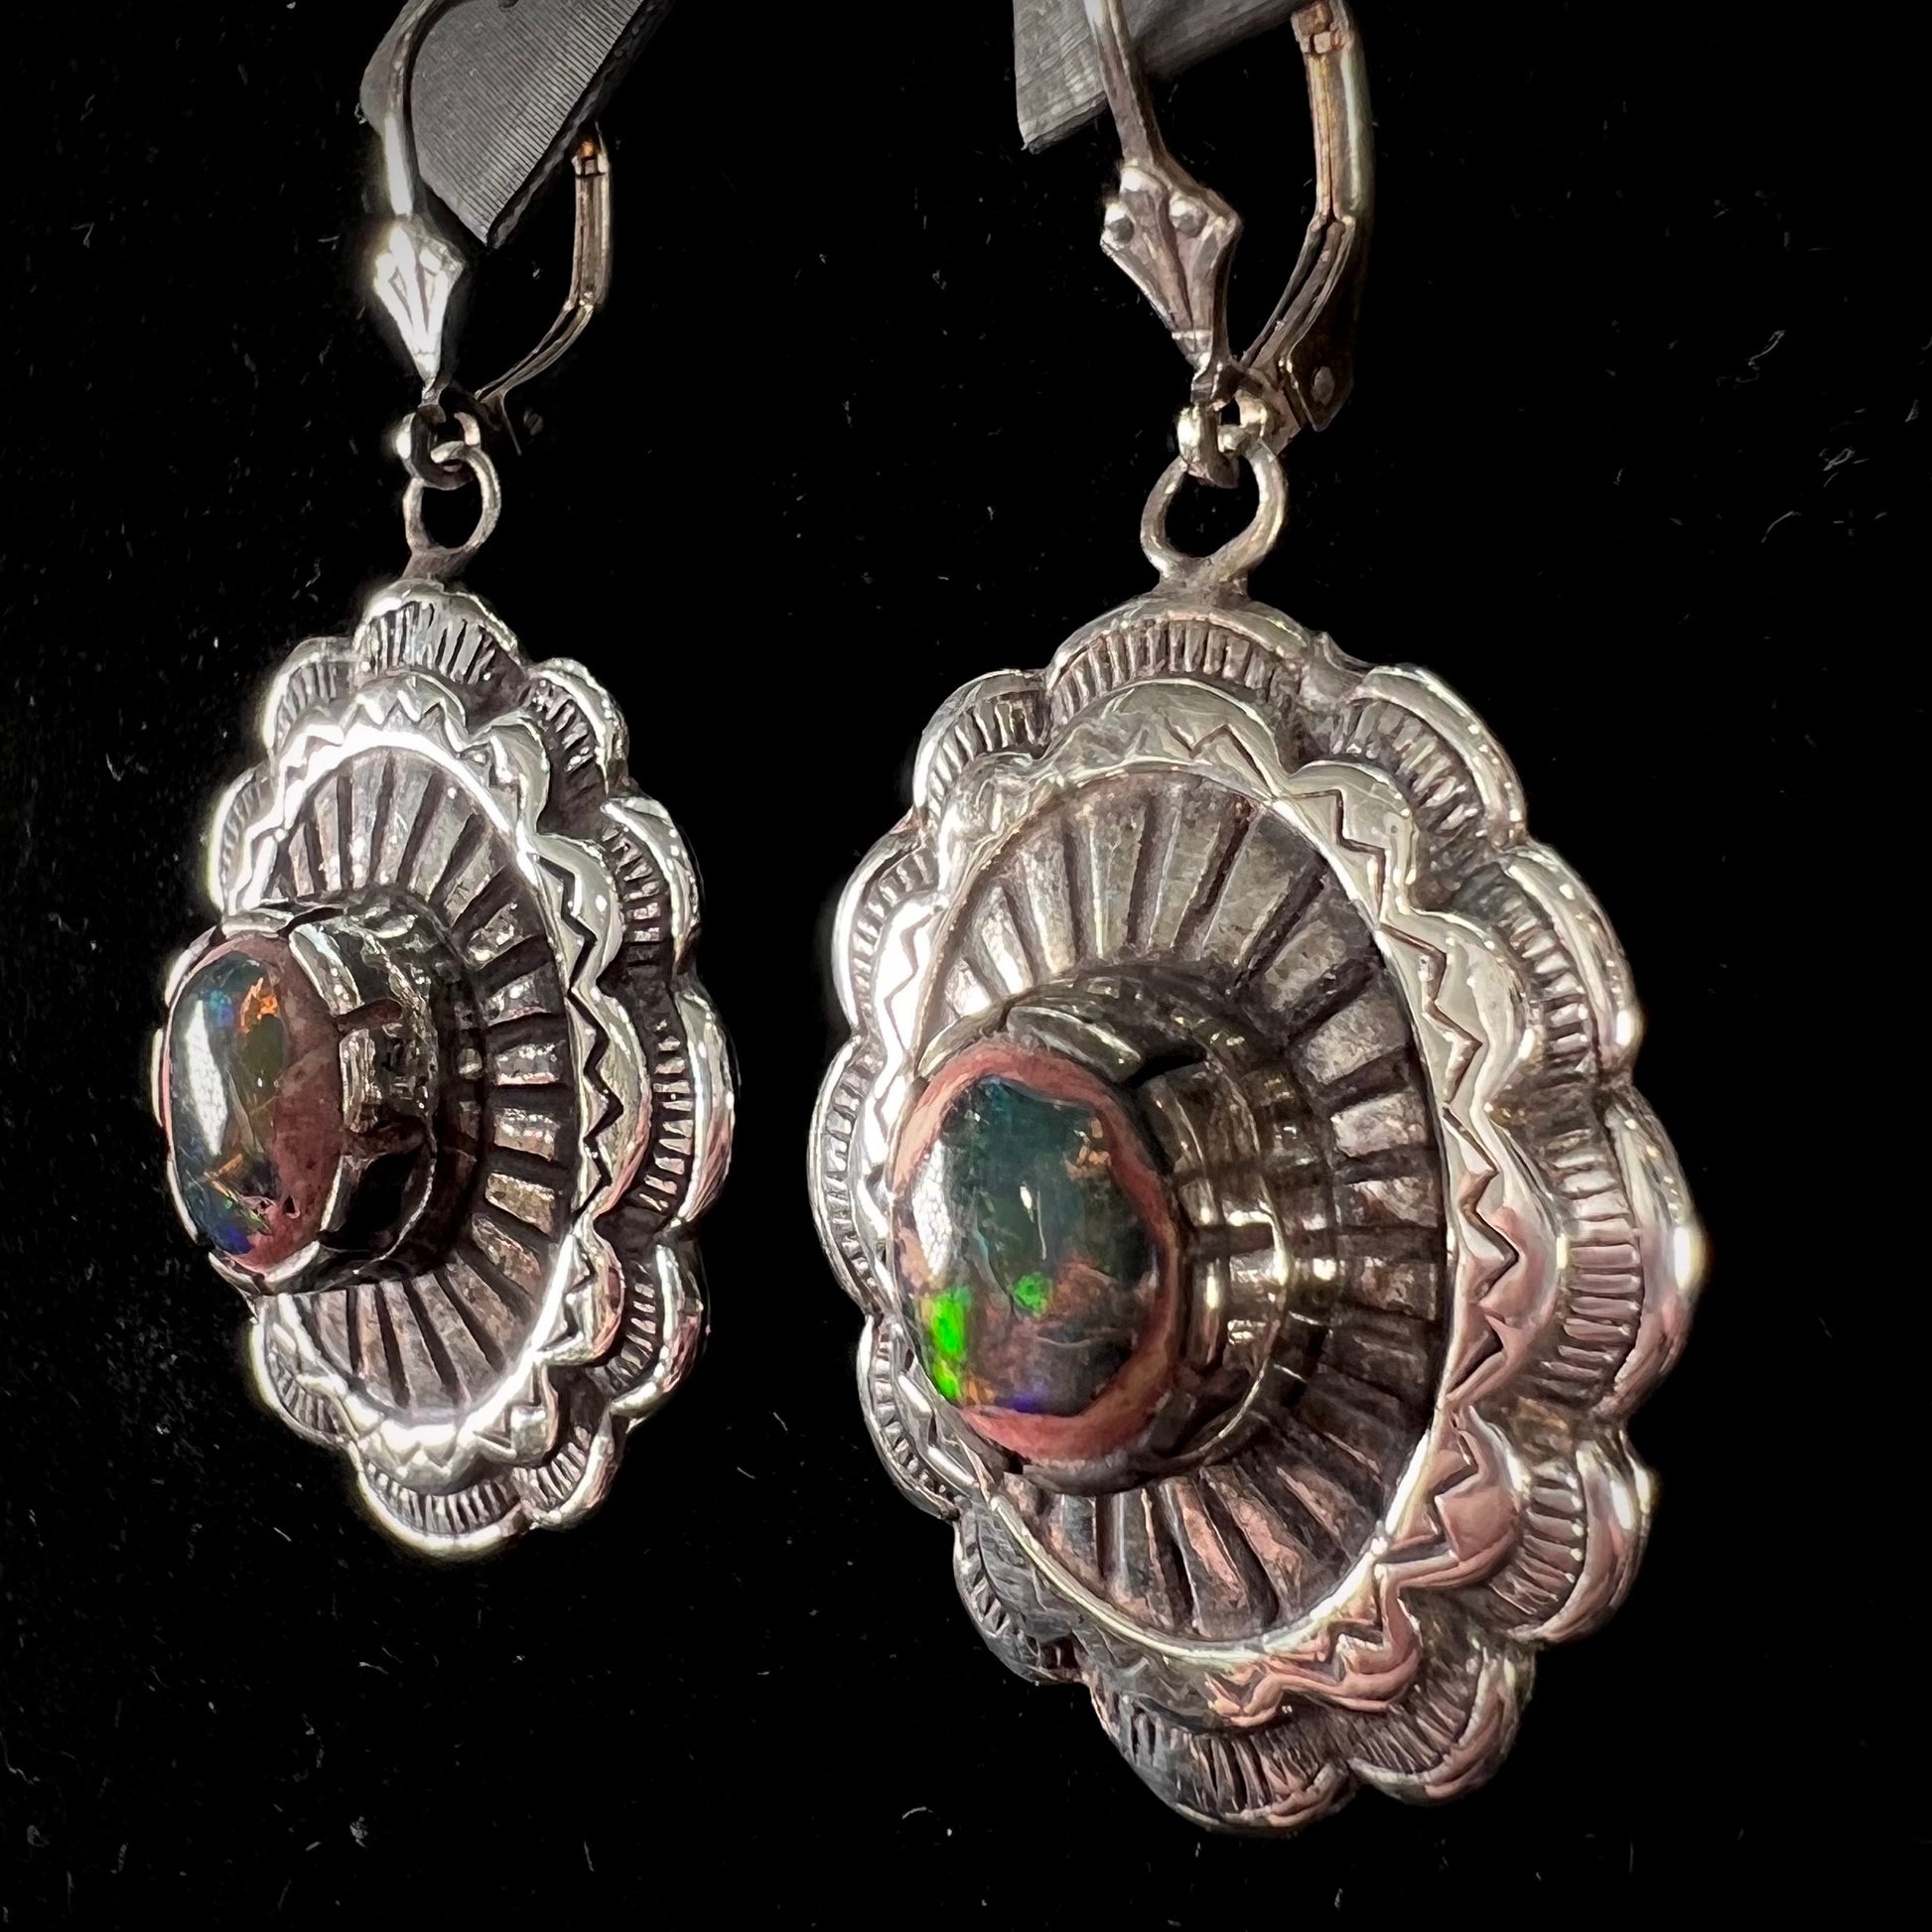 A pair of handmade sterling silver cantera opal earrings.  The earrings are Navajo style by artist Sam Yah.